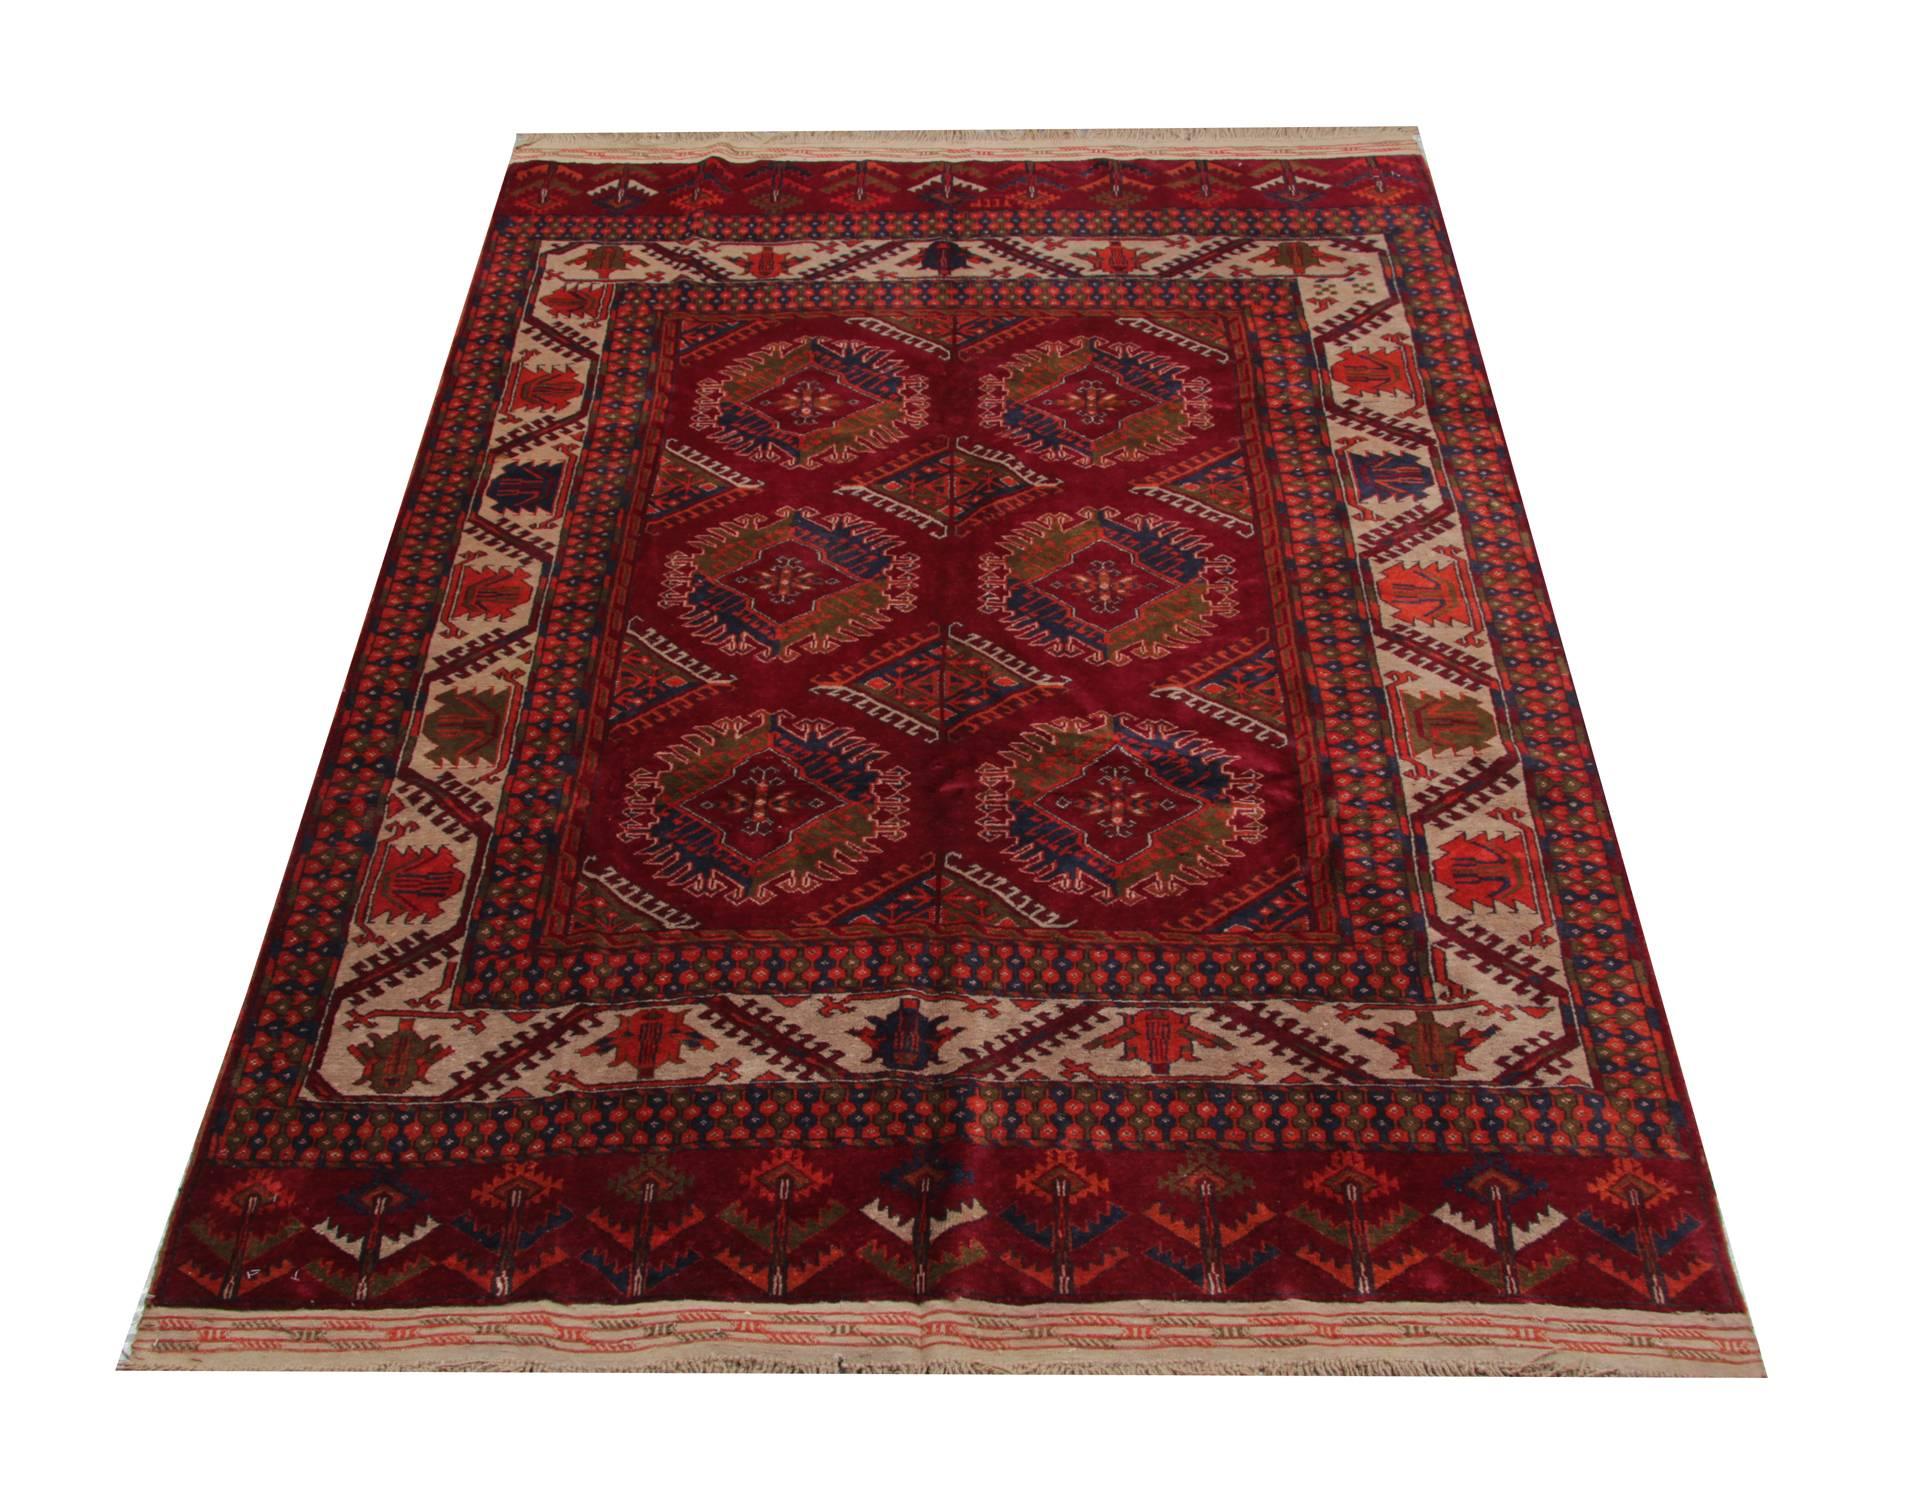 This antique Turkmen Youmot hand-woven wool rug was made using traditional vegetable dyes and handmade by the Turkmen tribespeople. This Rug is predominantly red in colour and has a repeated motif pattern covering the rug. This Antique rug would be